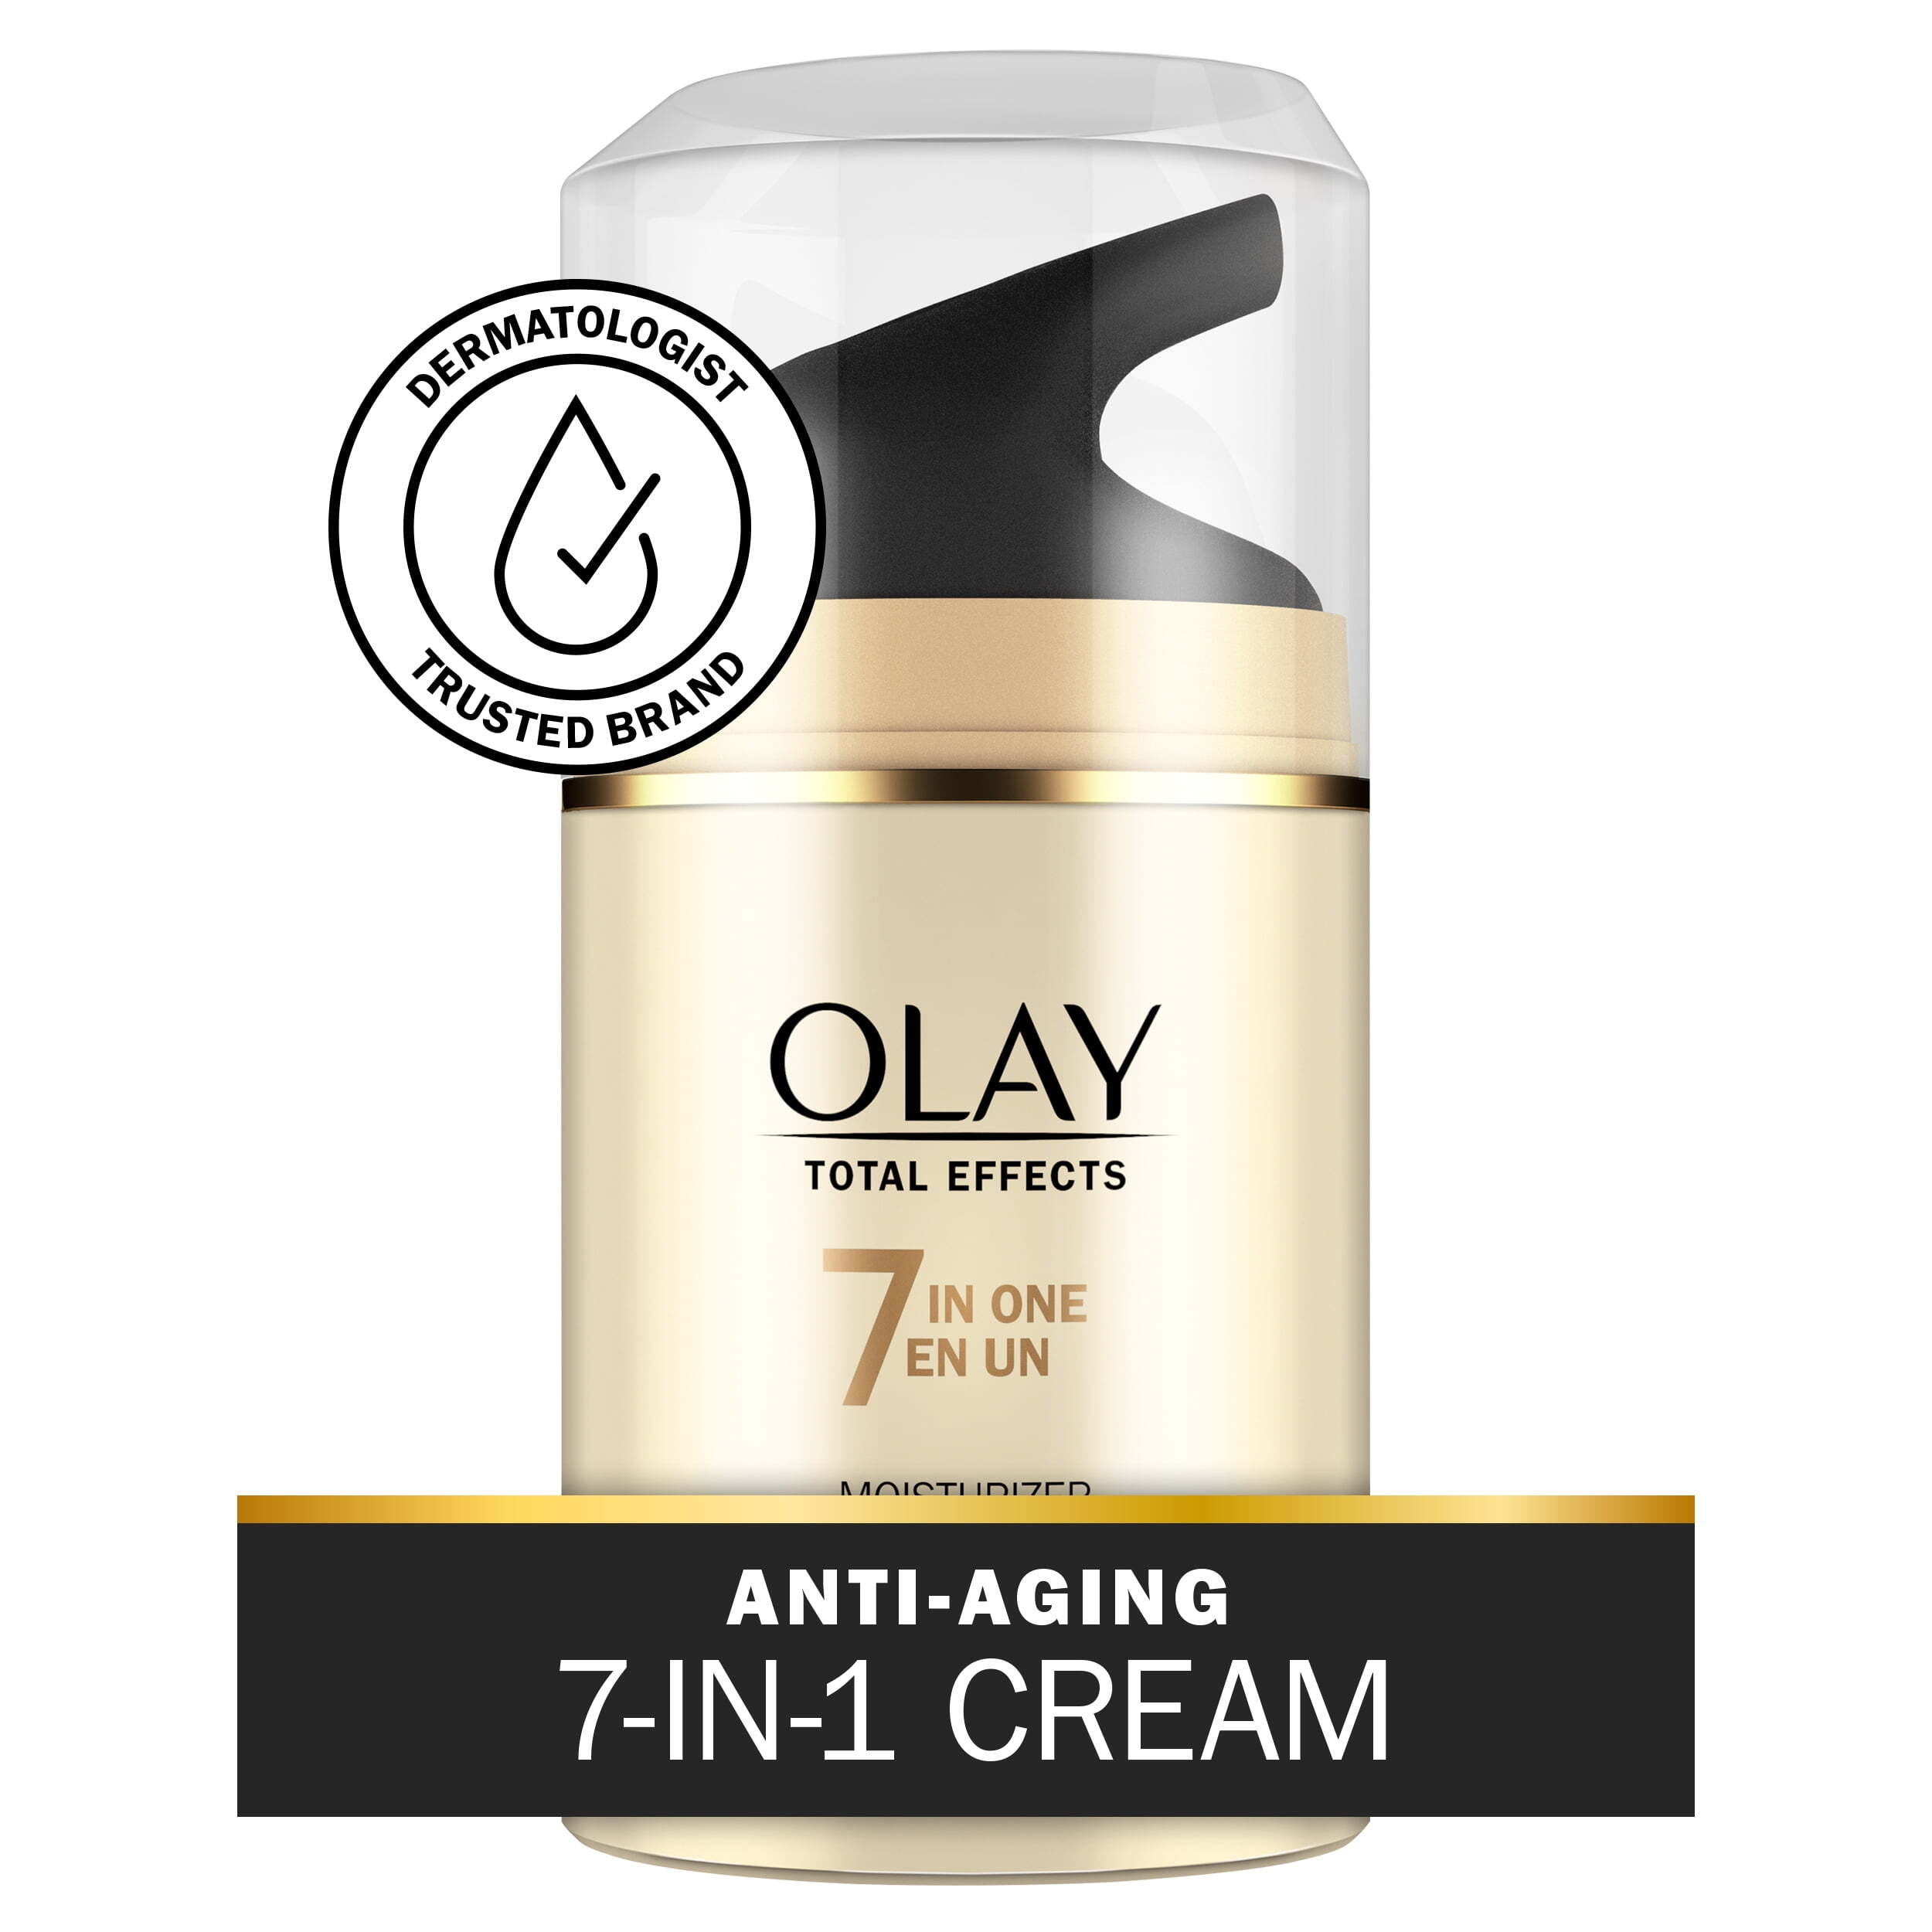 Olay Total Effects Face Moisturizer, All Skin Types, Reduces Enlarged Pores, 1.7 fl oz - image 1 of 12